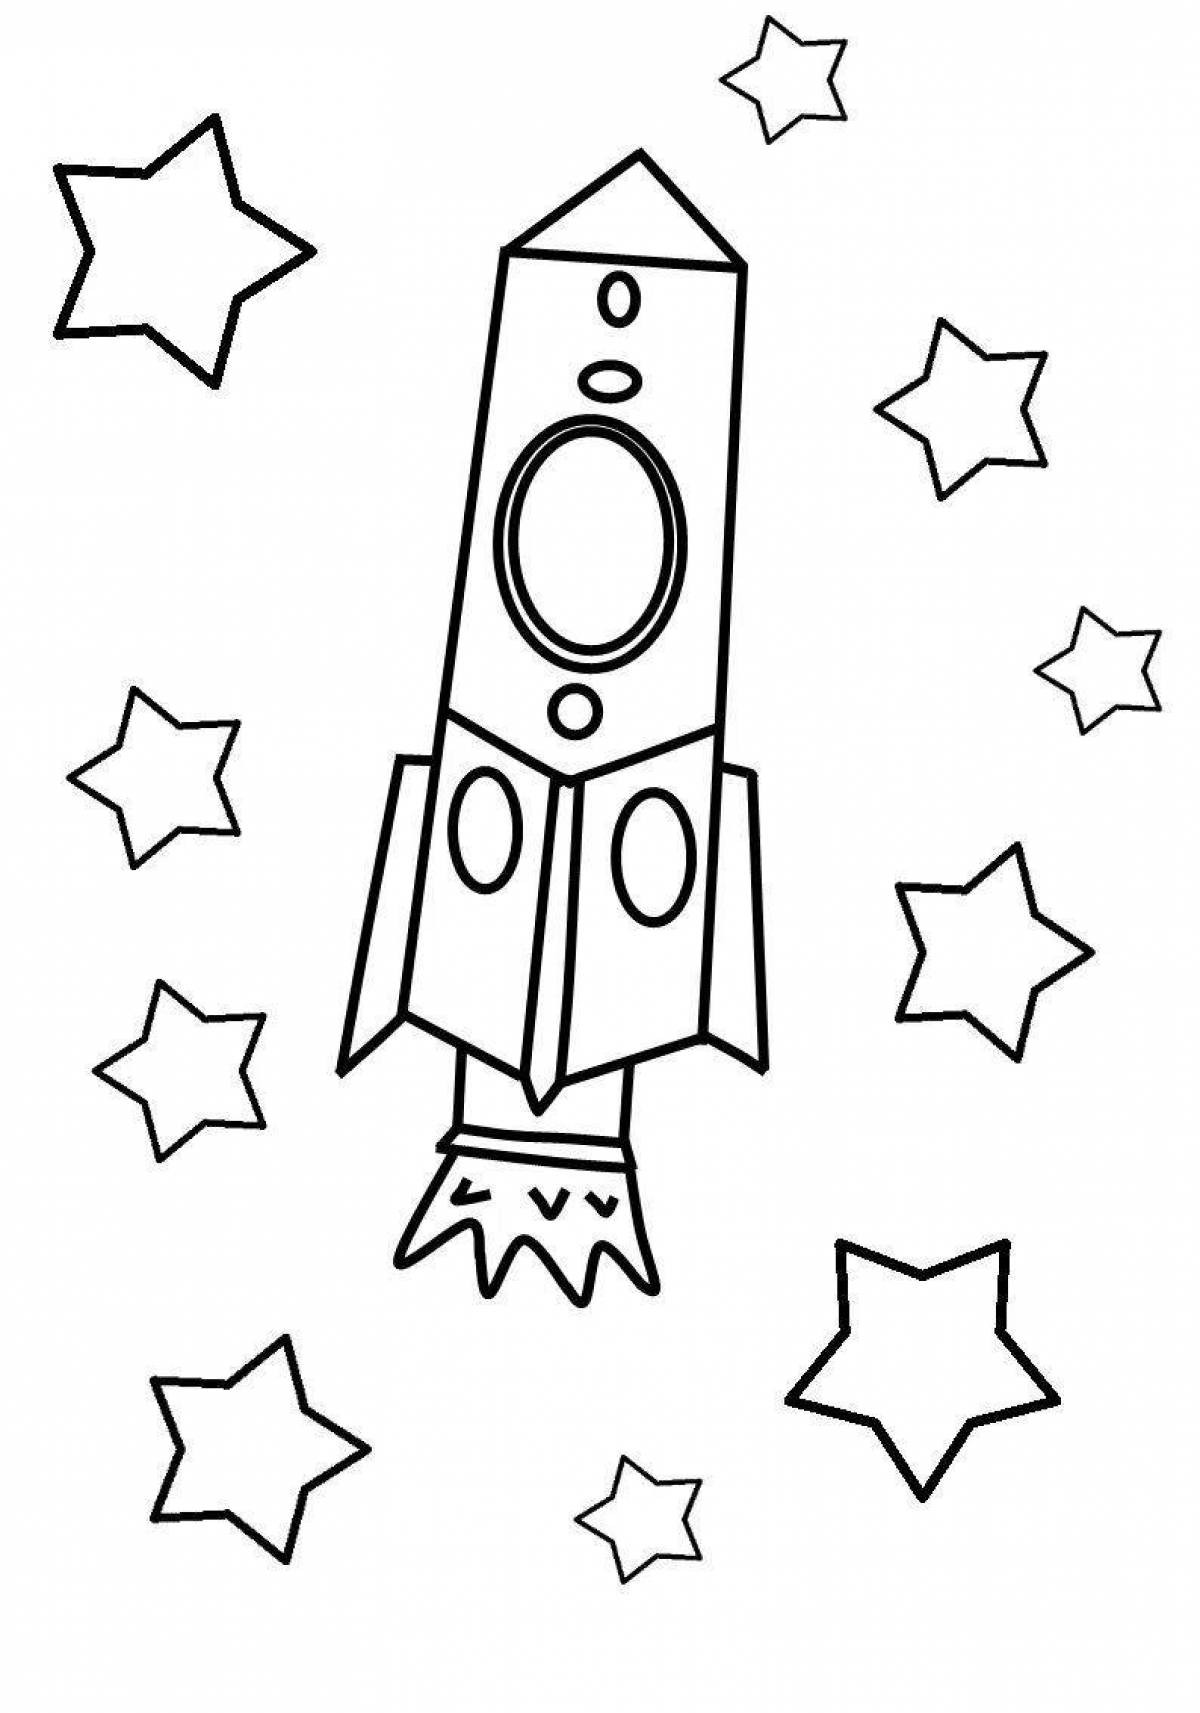 Exciting rocket coloring book for kids